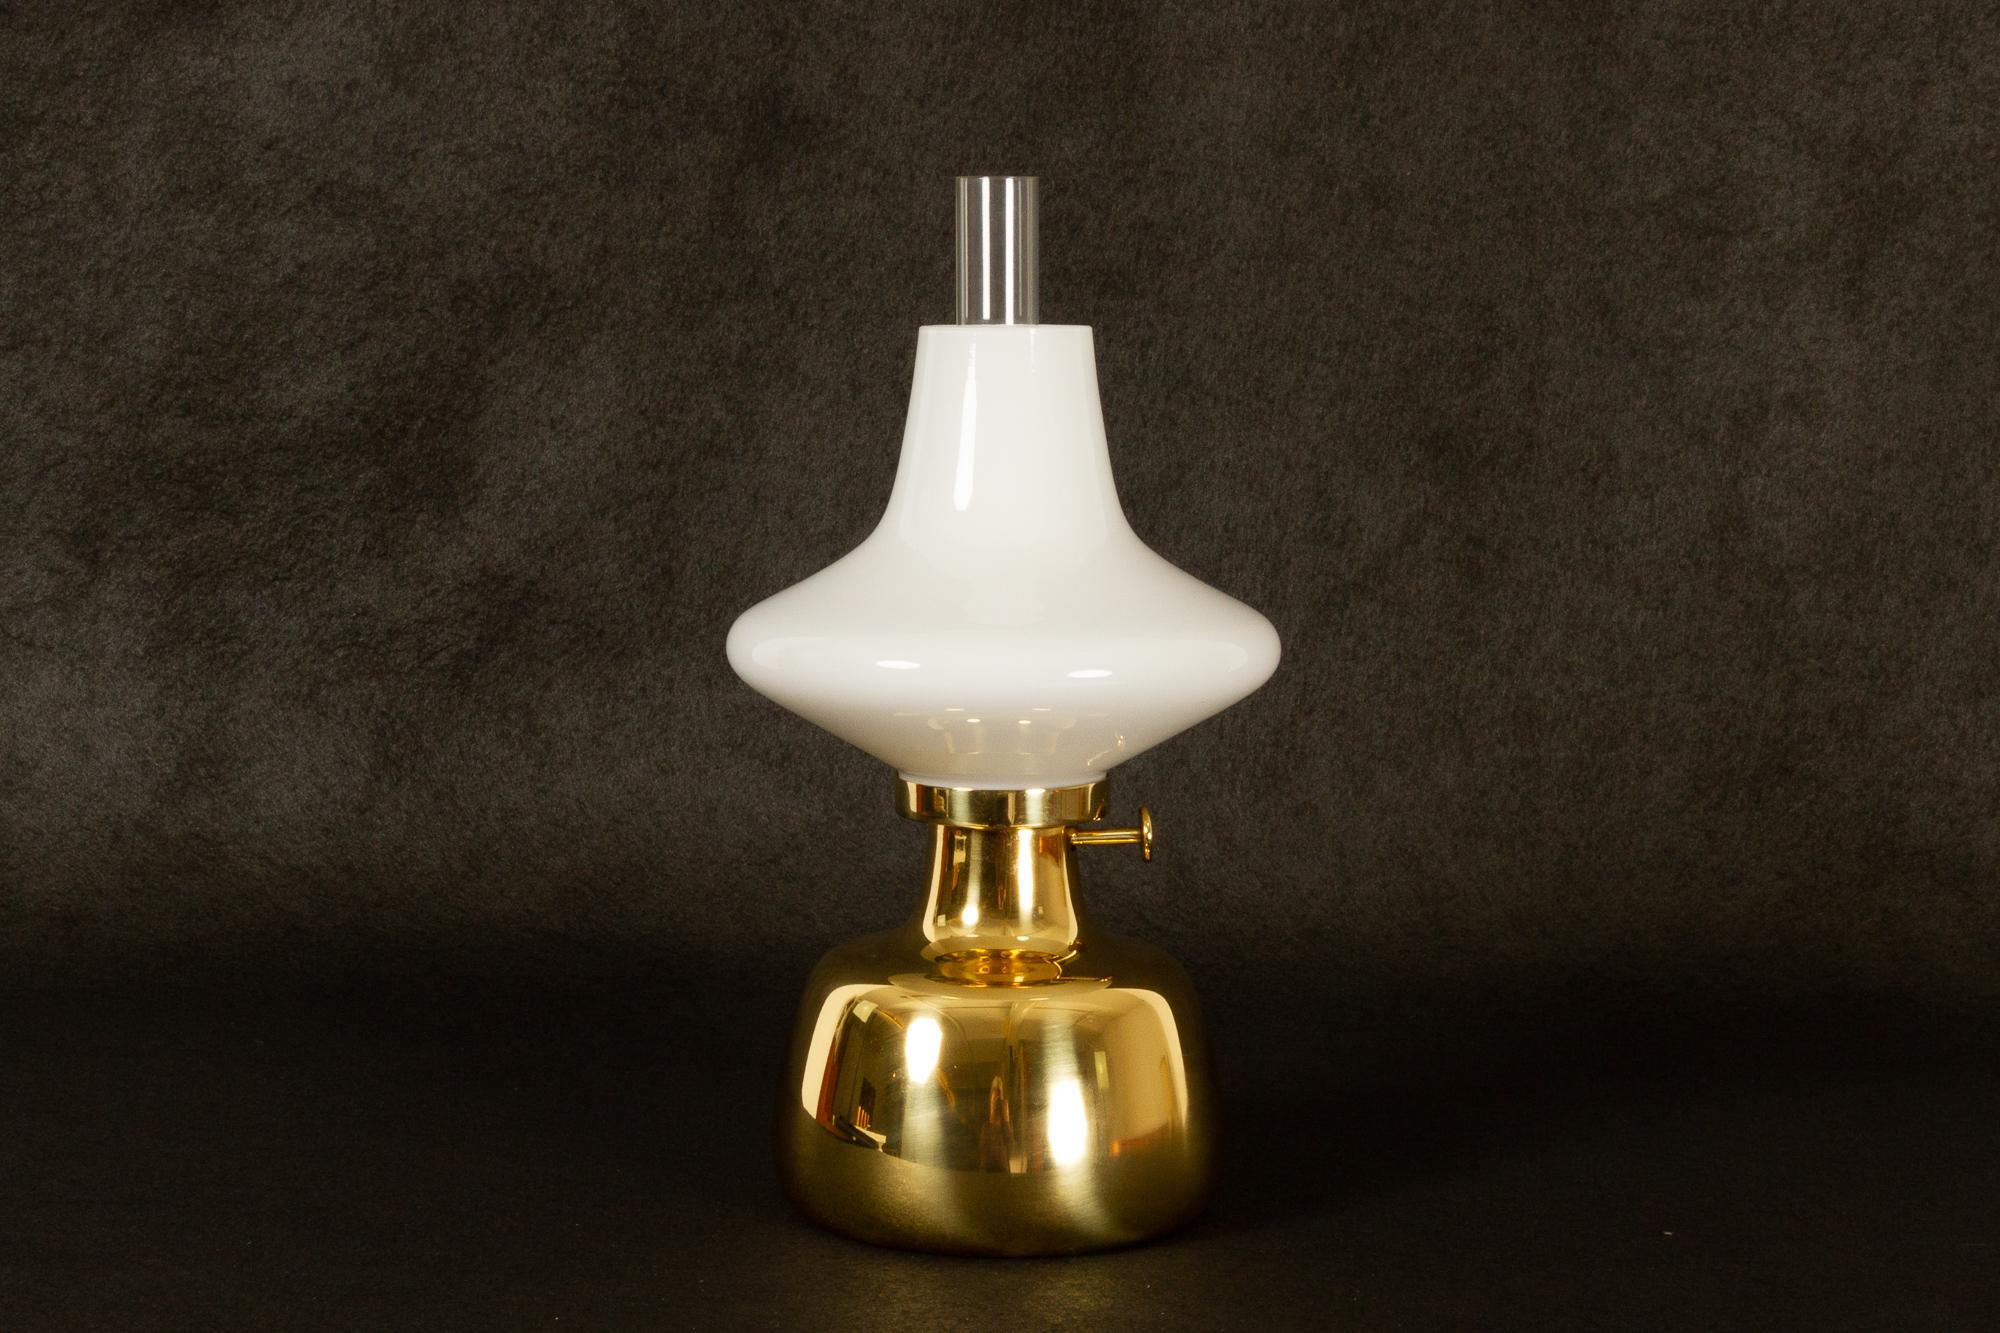 Petronella lamp by Henning Koppel for Louis Poulsen, 1960s.
Danish oil lamp in brass and white opaline glass. Designed by Danish designer Henning Koppel in 1961. The lamp body was handmade in 1993 by Louis Poulsen in Denmark. The glass parts were